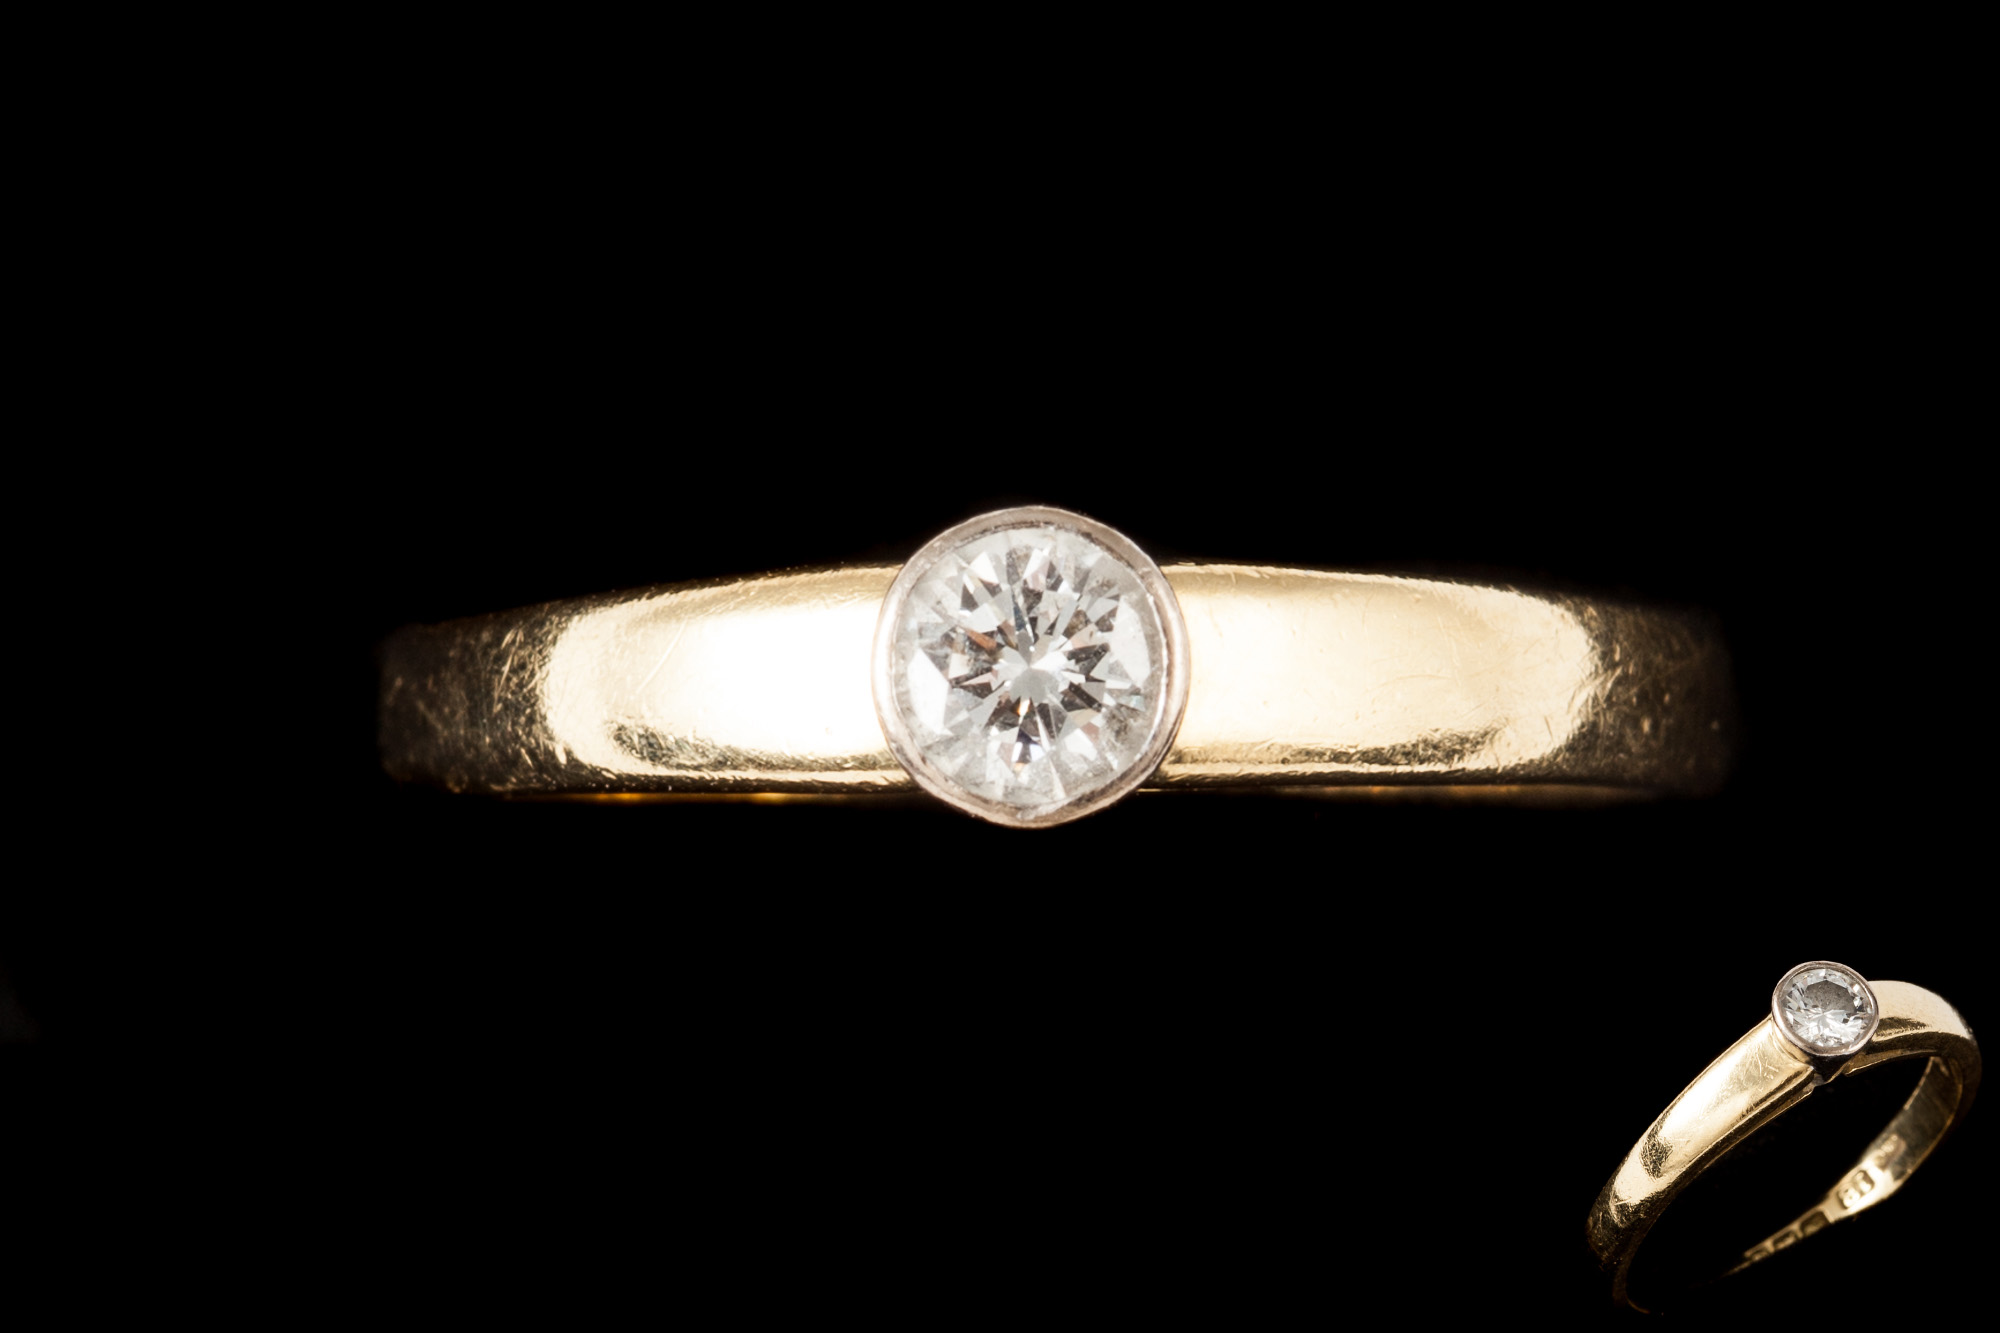 A DIAMOND SOLITAIRE RING, of approx. 0.